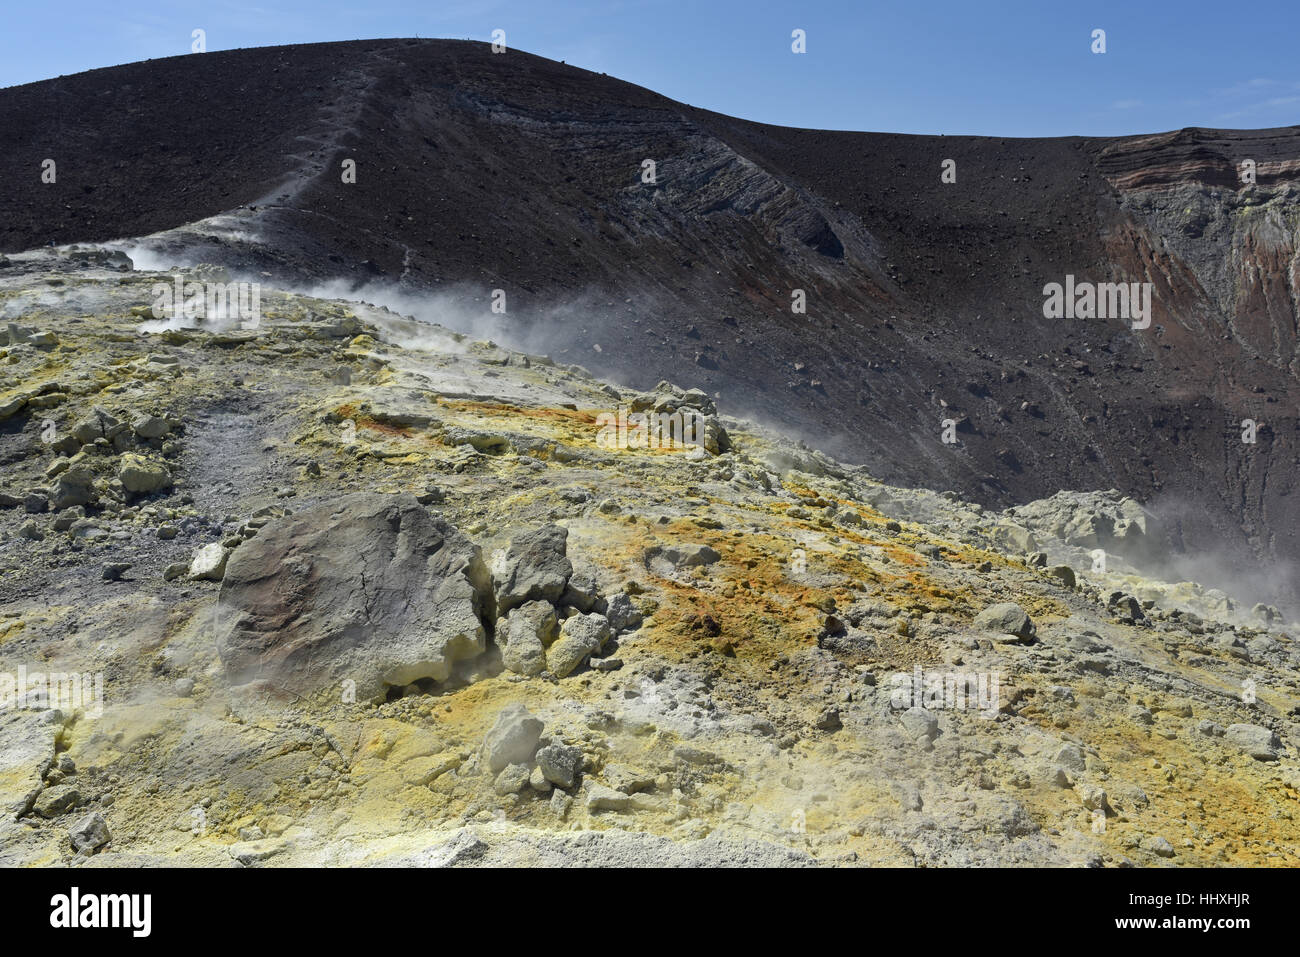 Sulphurous gases along the Gran Cratere of Vulcano, one of the Aeolian Islands Stock Photo